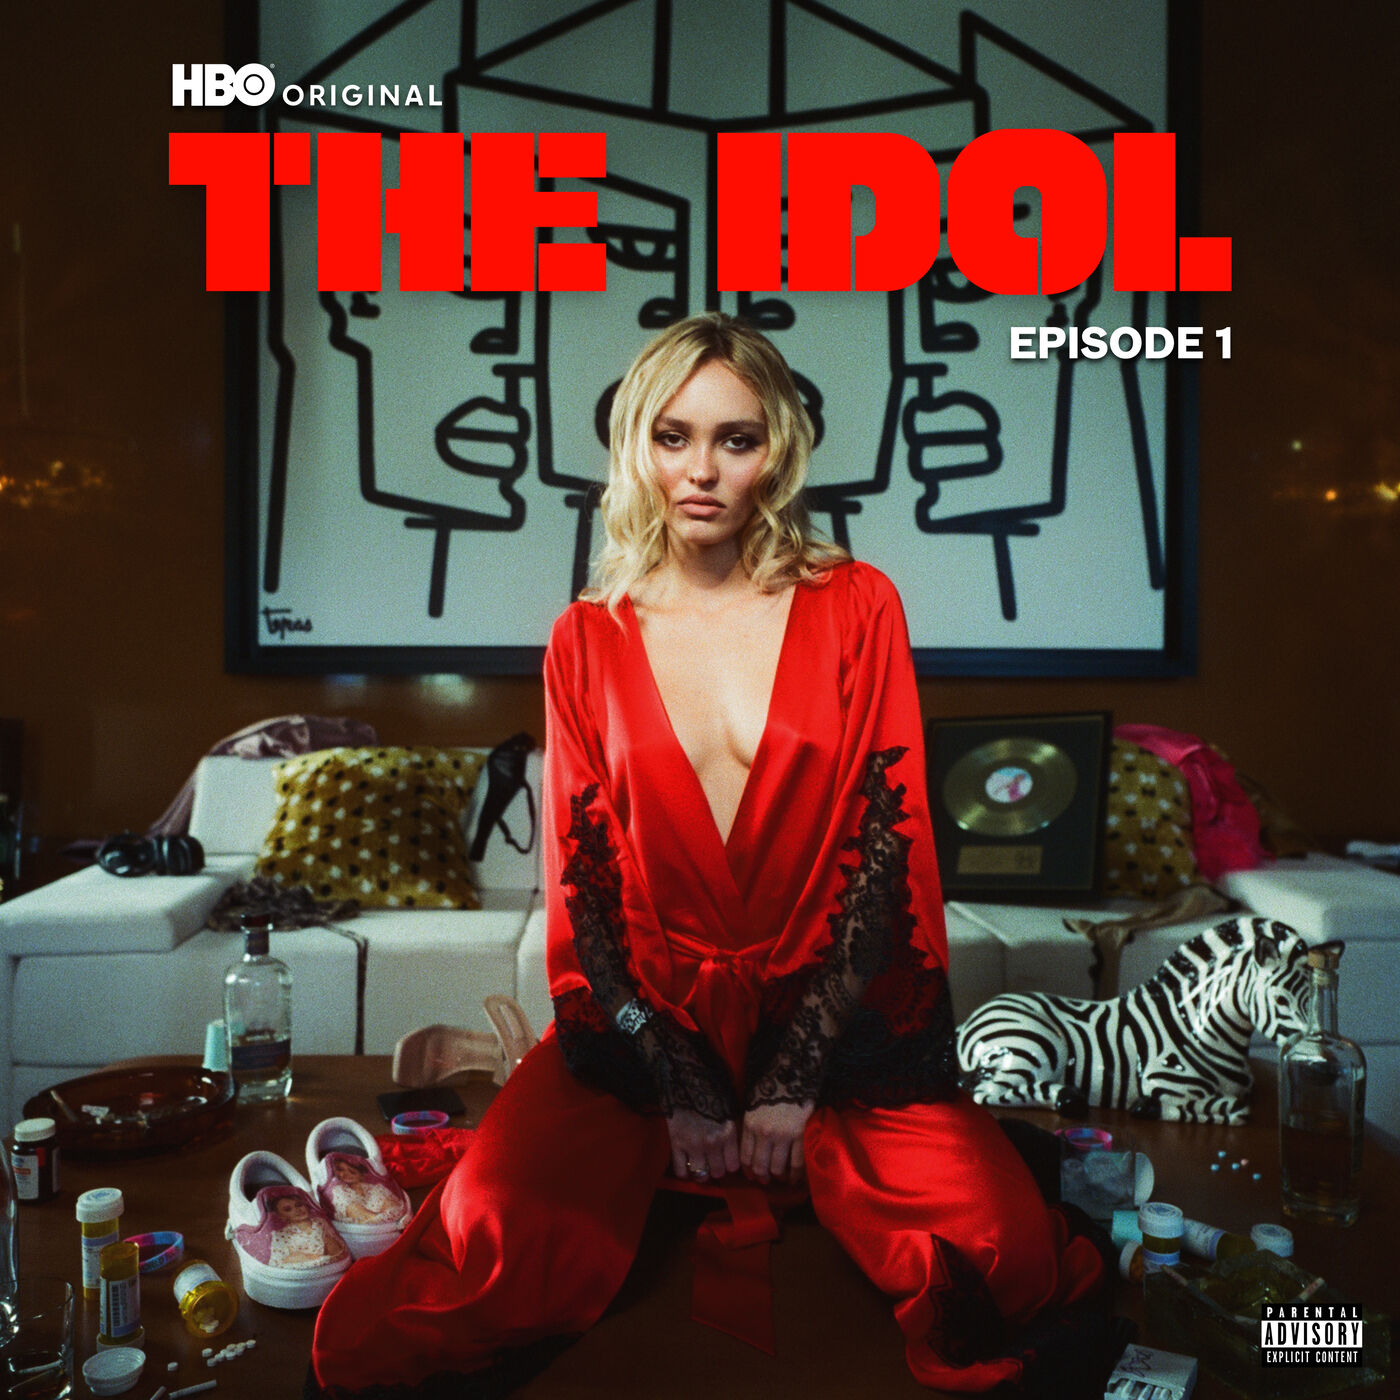 The Weeknd – The Idol Episode 1 (Music from the HBO Original Series)Ⓔ【88.2kHz／24bit】美国区-OppsUpro音乐帝国